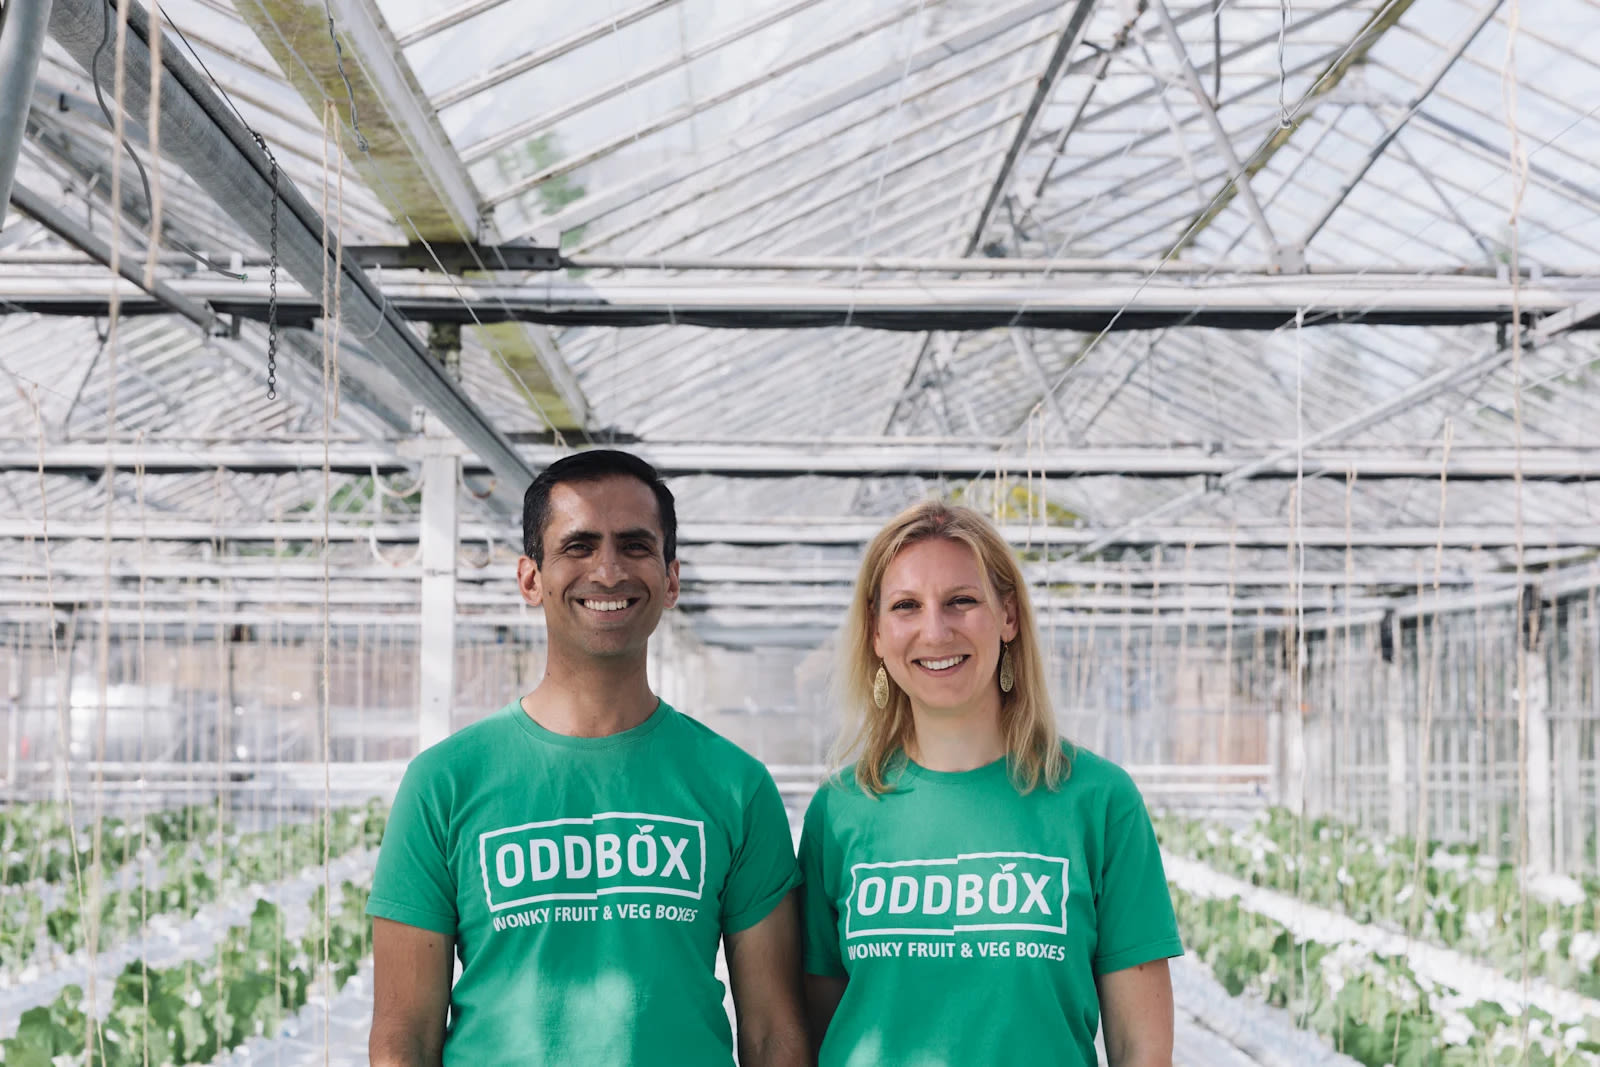 The founders of ODDBOX smile inside a greenhouse